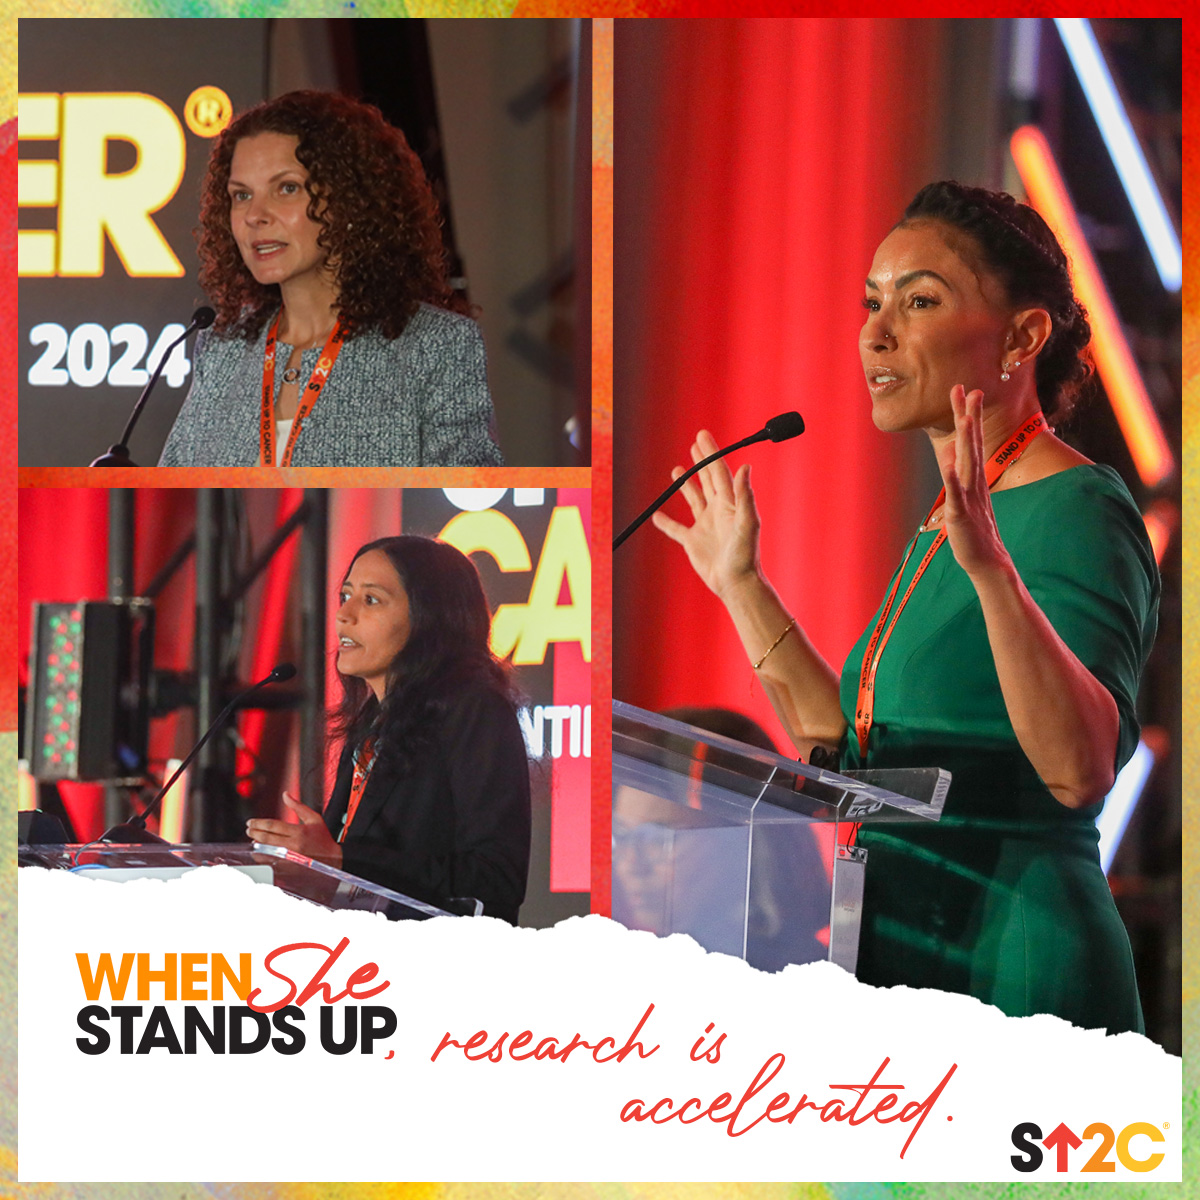 #WhenSheStandsUp, she can change the world. 🙌 #StandUpToCancer's portfolio includes more than 3,000 scientists, many of whom are women working to uncover the next cancer breakthrough. Support our mission at StandUpToCancer.org/WhenSheStandsU….